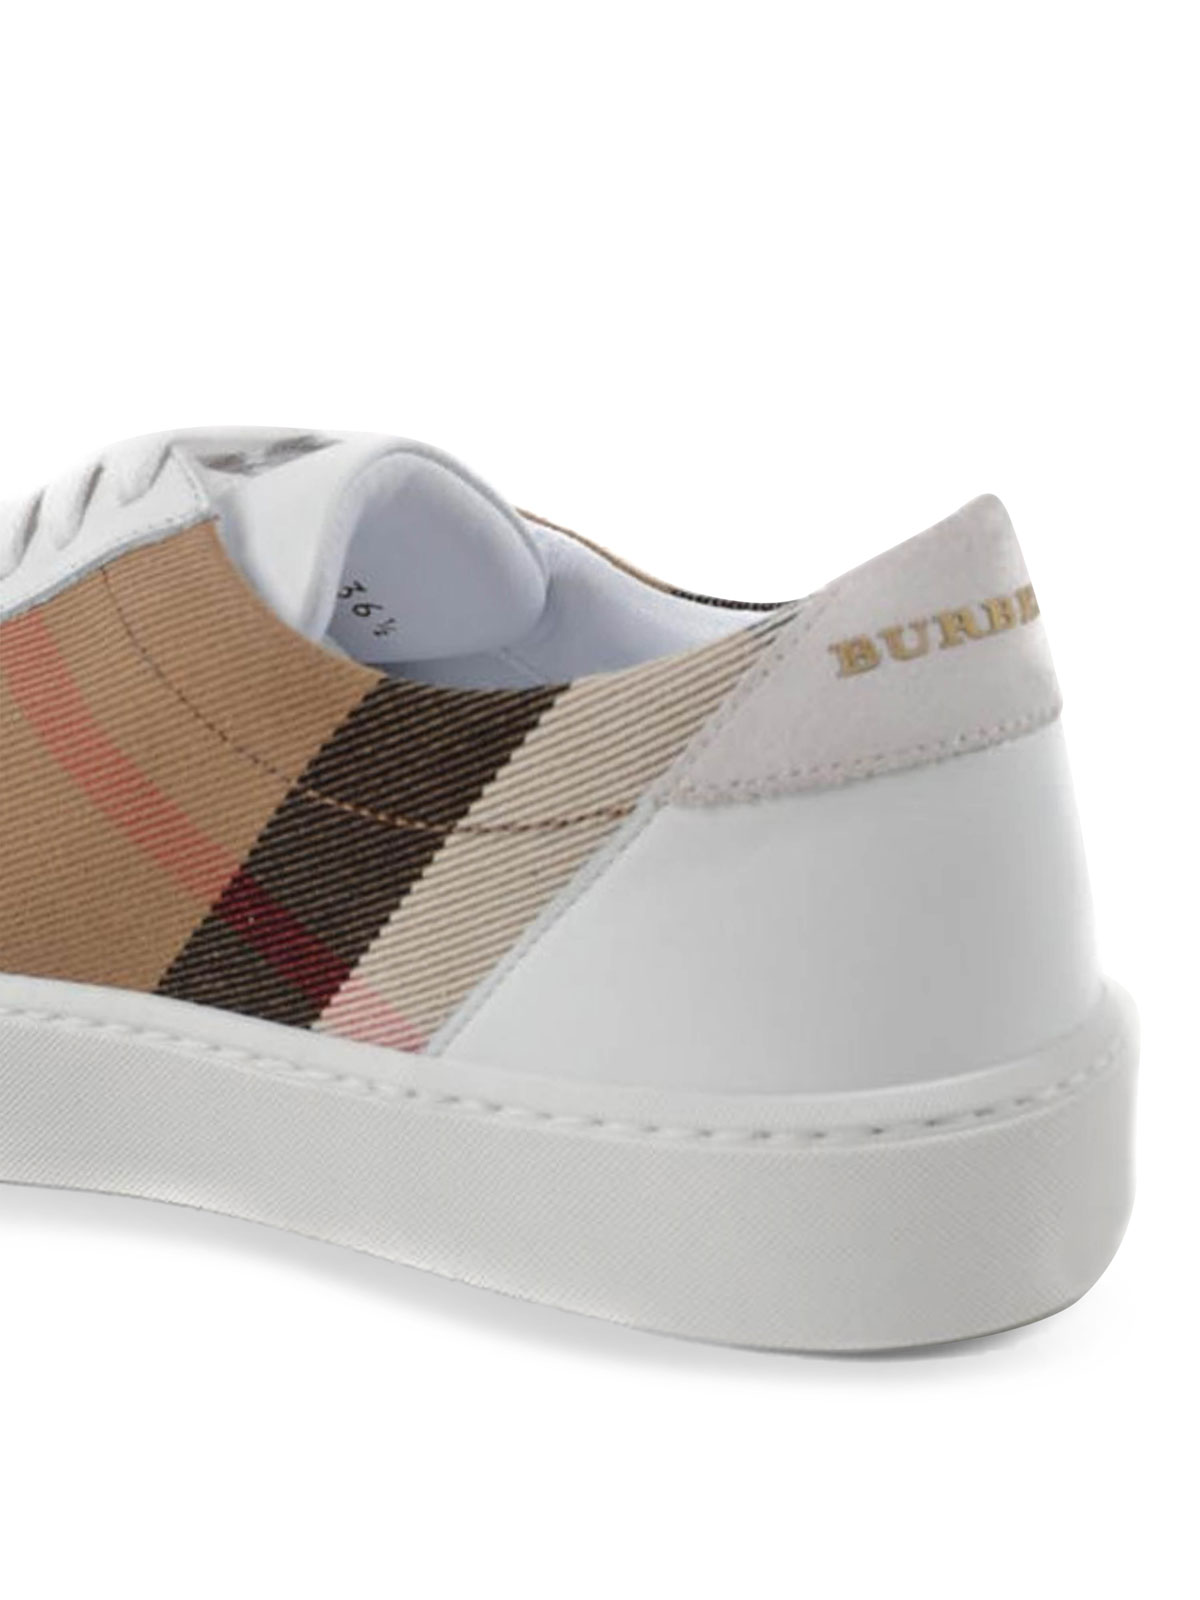 Burberry - Leather sneakers - trainers 